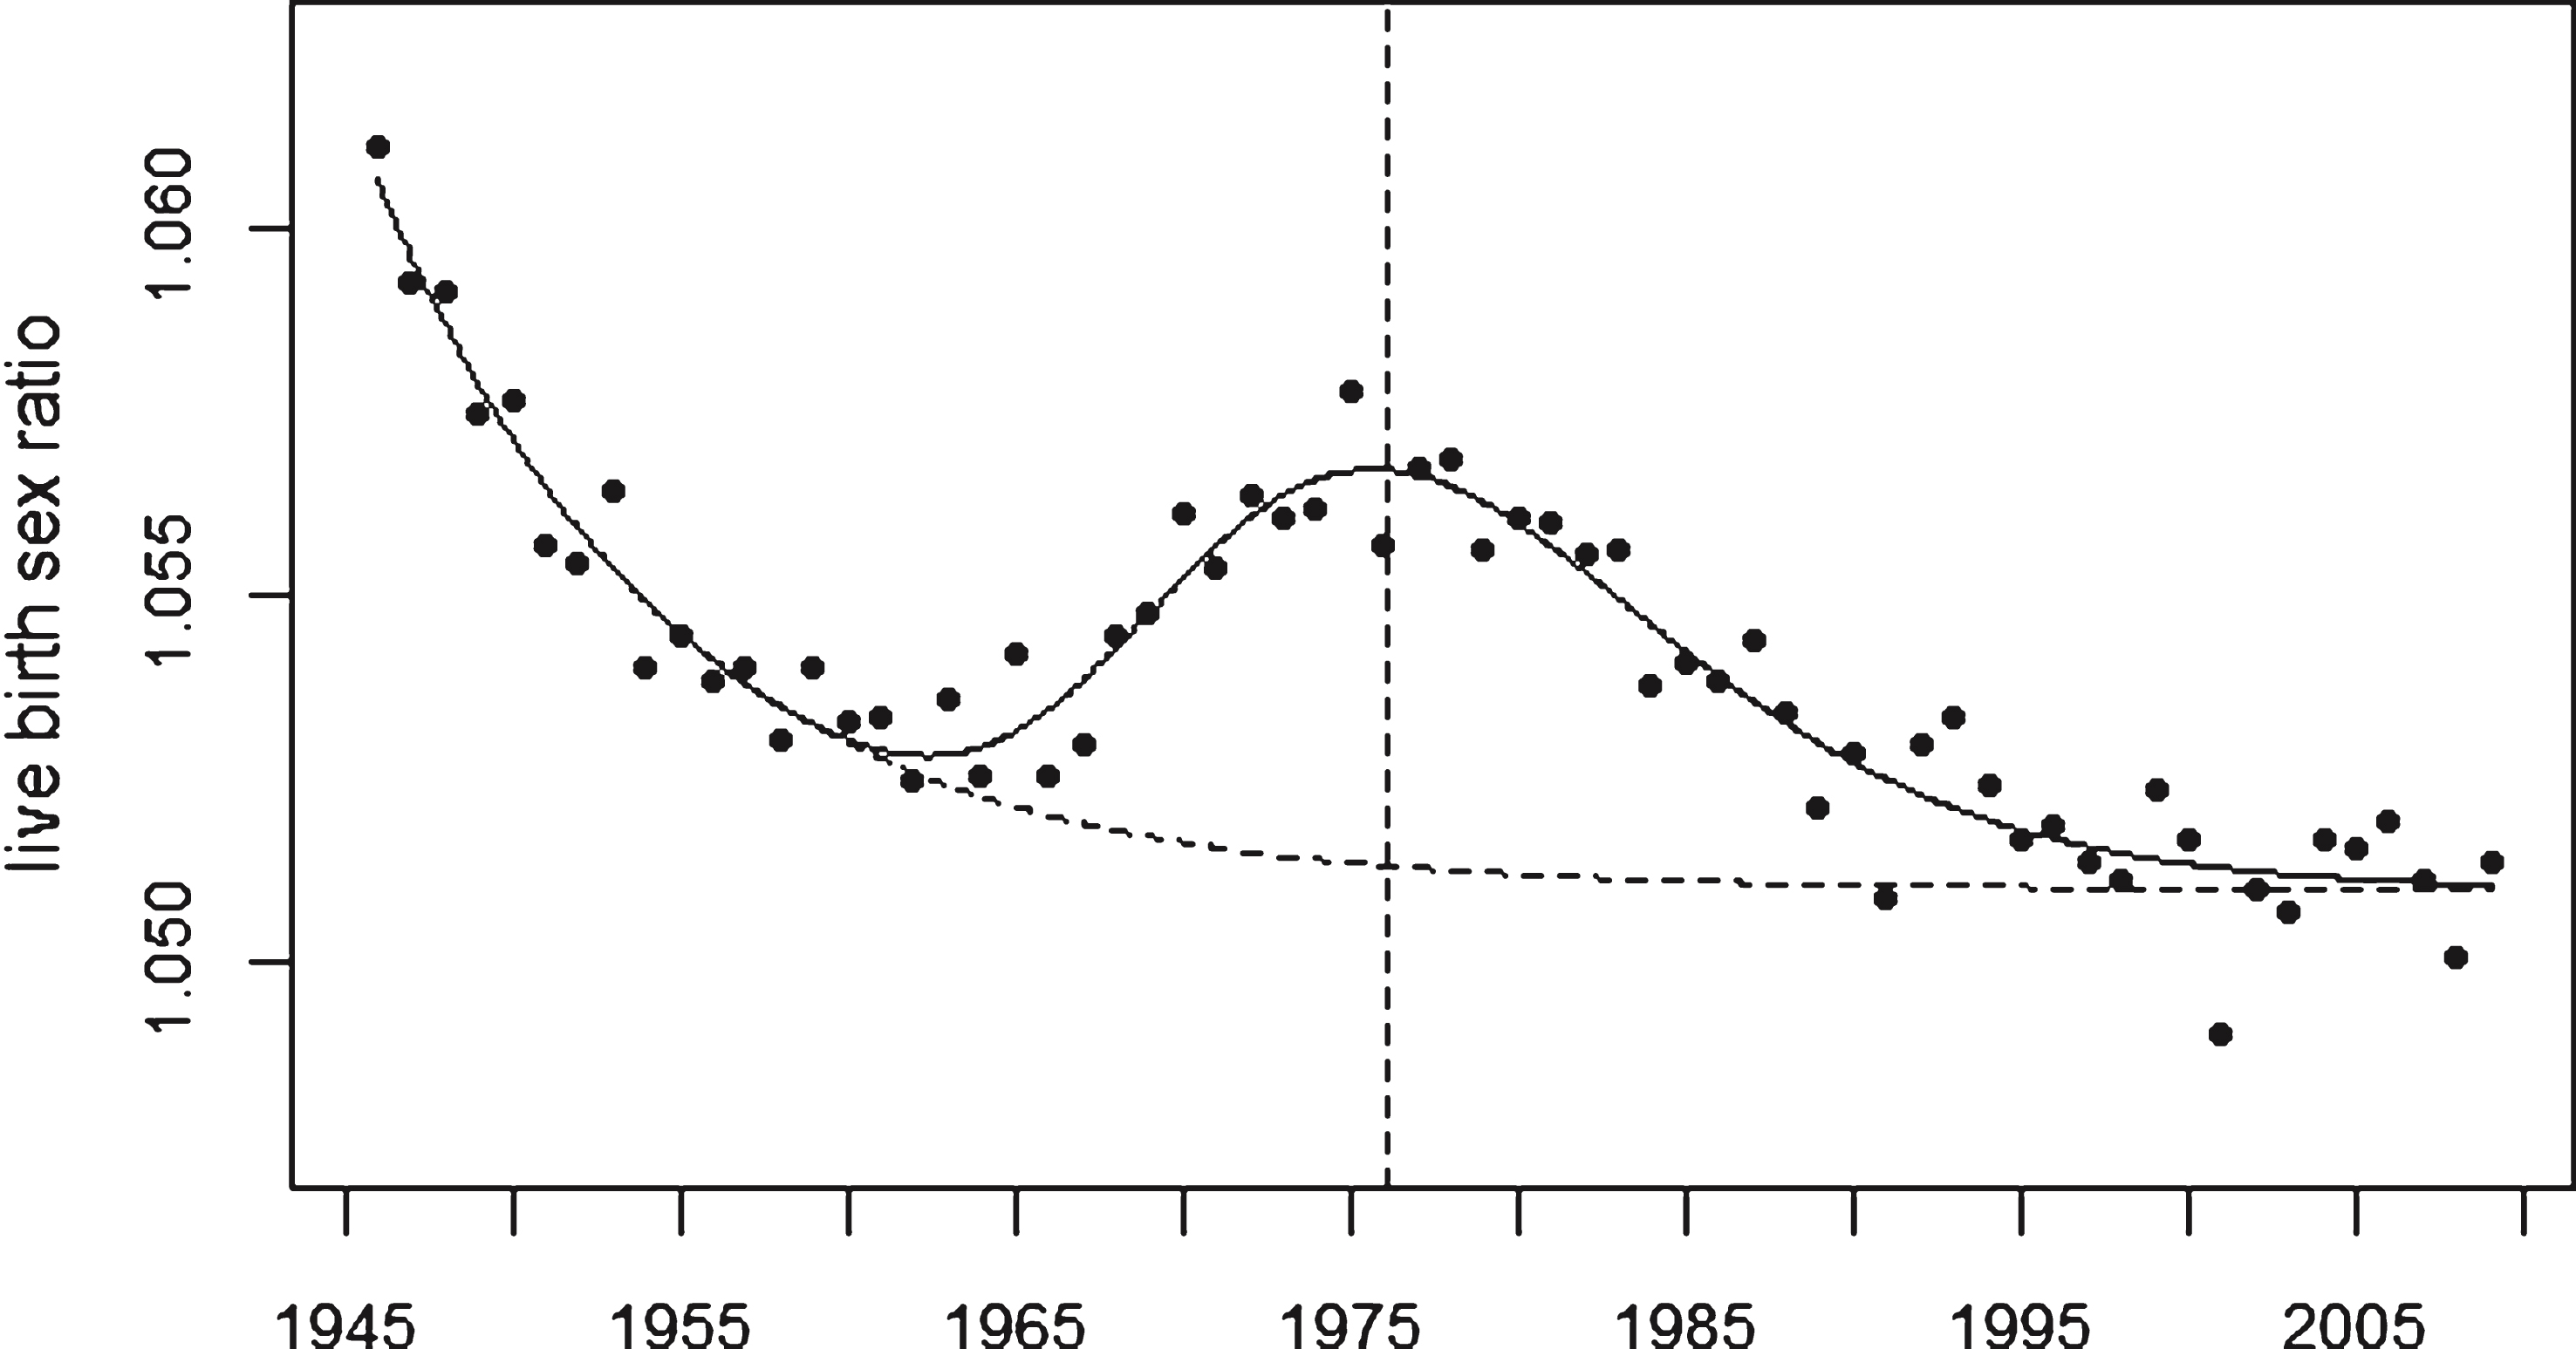 Live birth sex ratio in USA plus 5 European countries and trend line. The broken line shows the undisturbed trend.